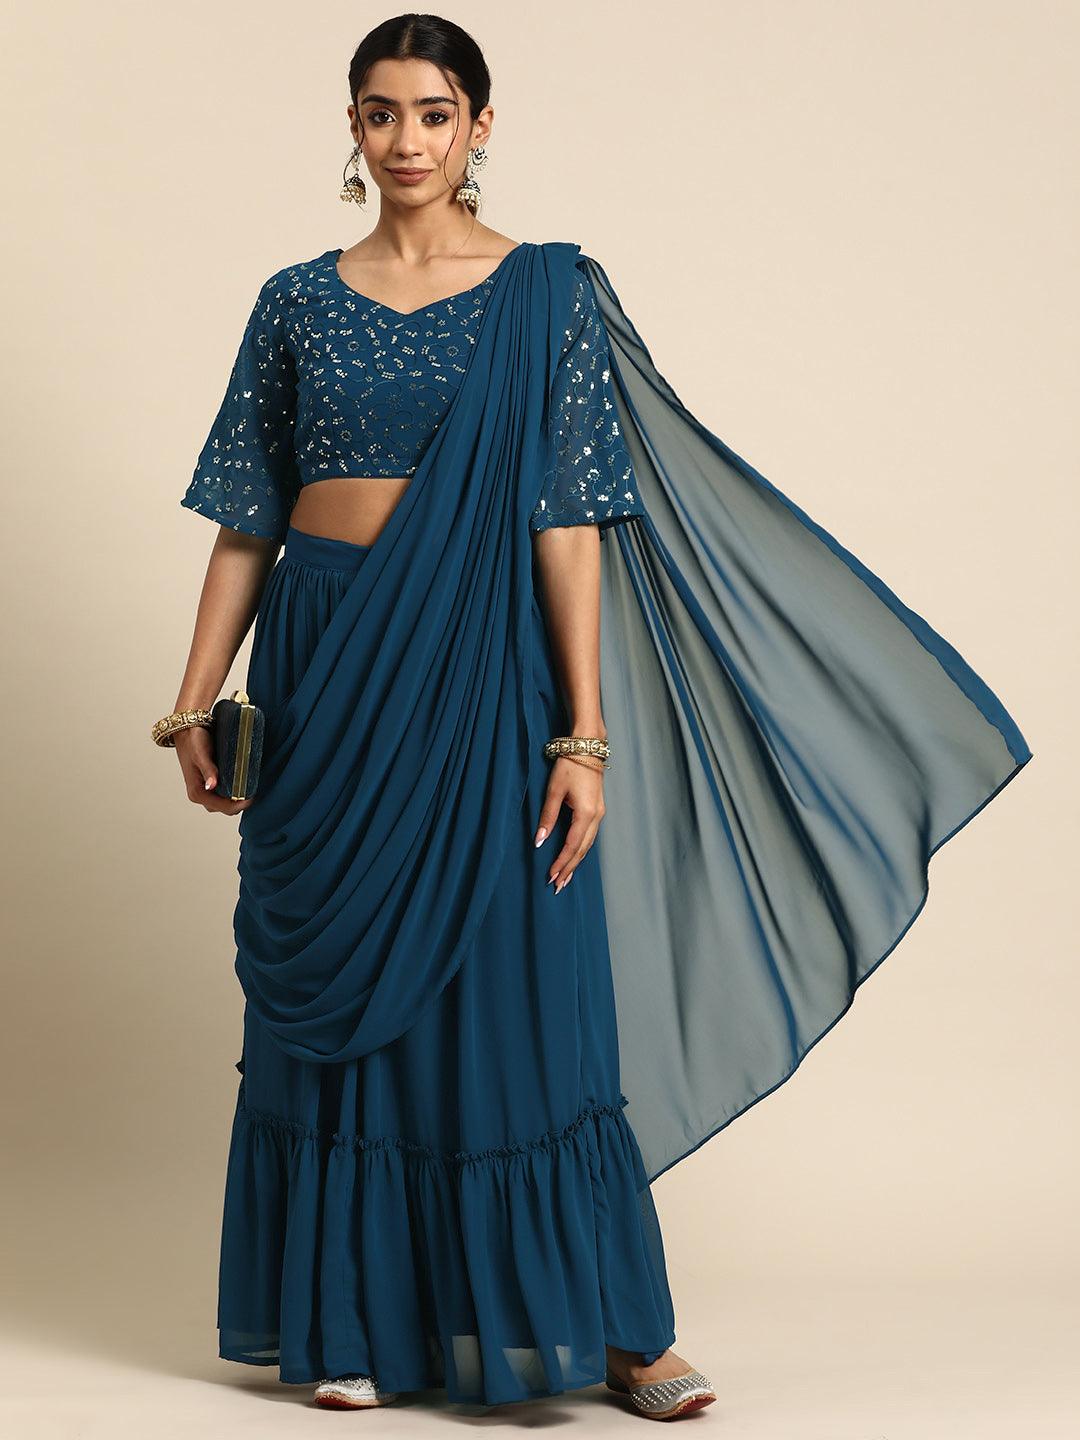 Blue Embroidered Georgette Saree